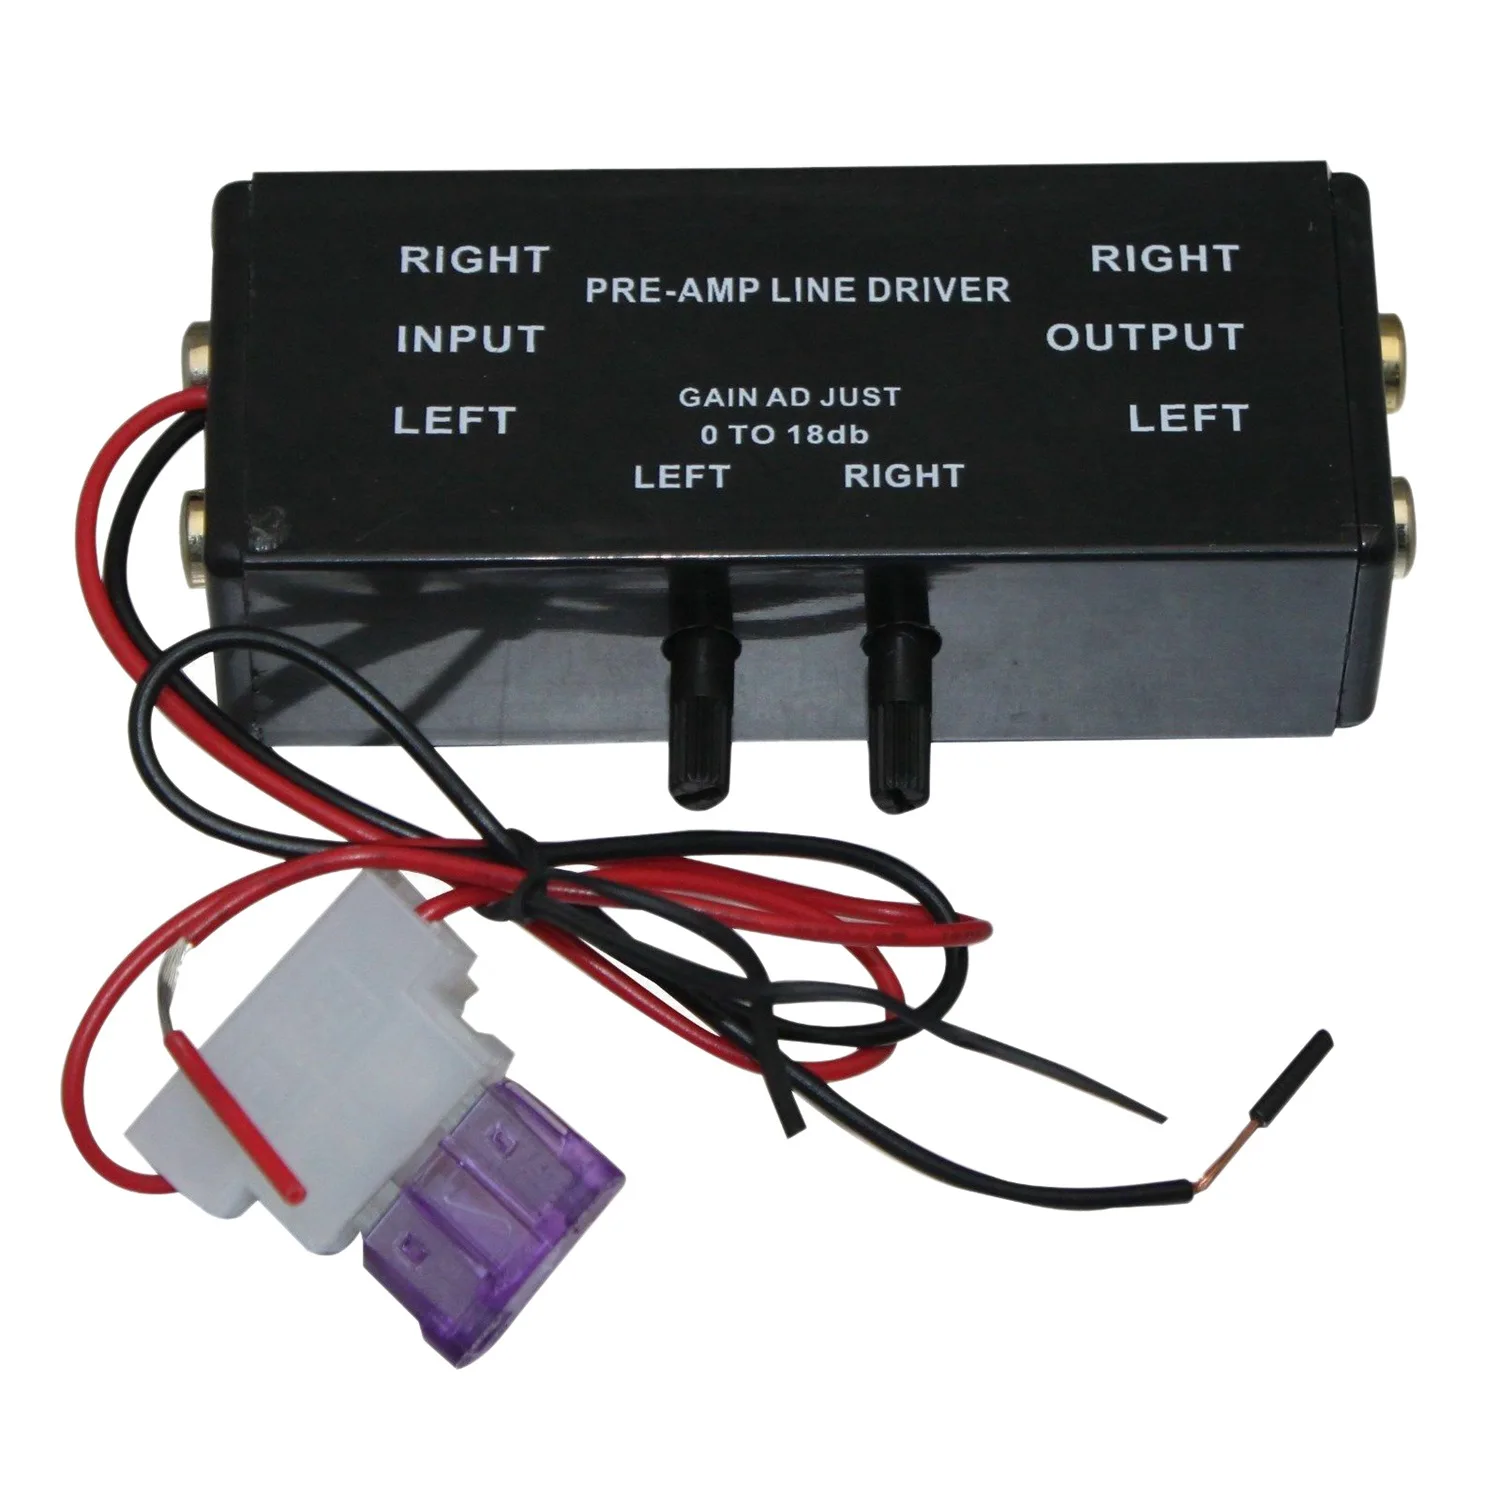 

New Black Rca Input/Output Adjustable Pac Turbo 1 Line Driver Signal Amplifier Booster Adapter for Car Boat